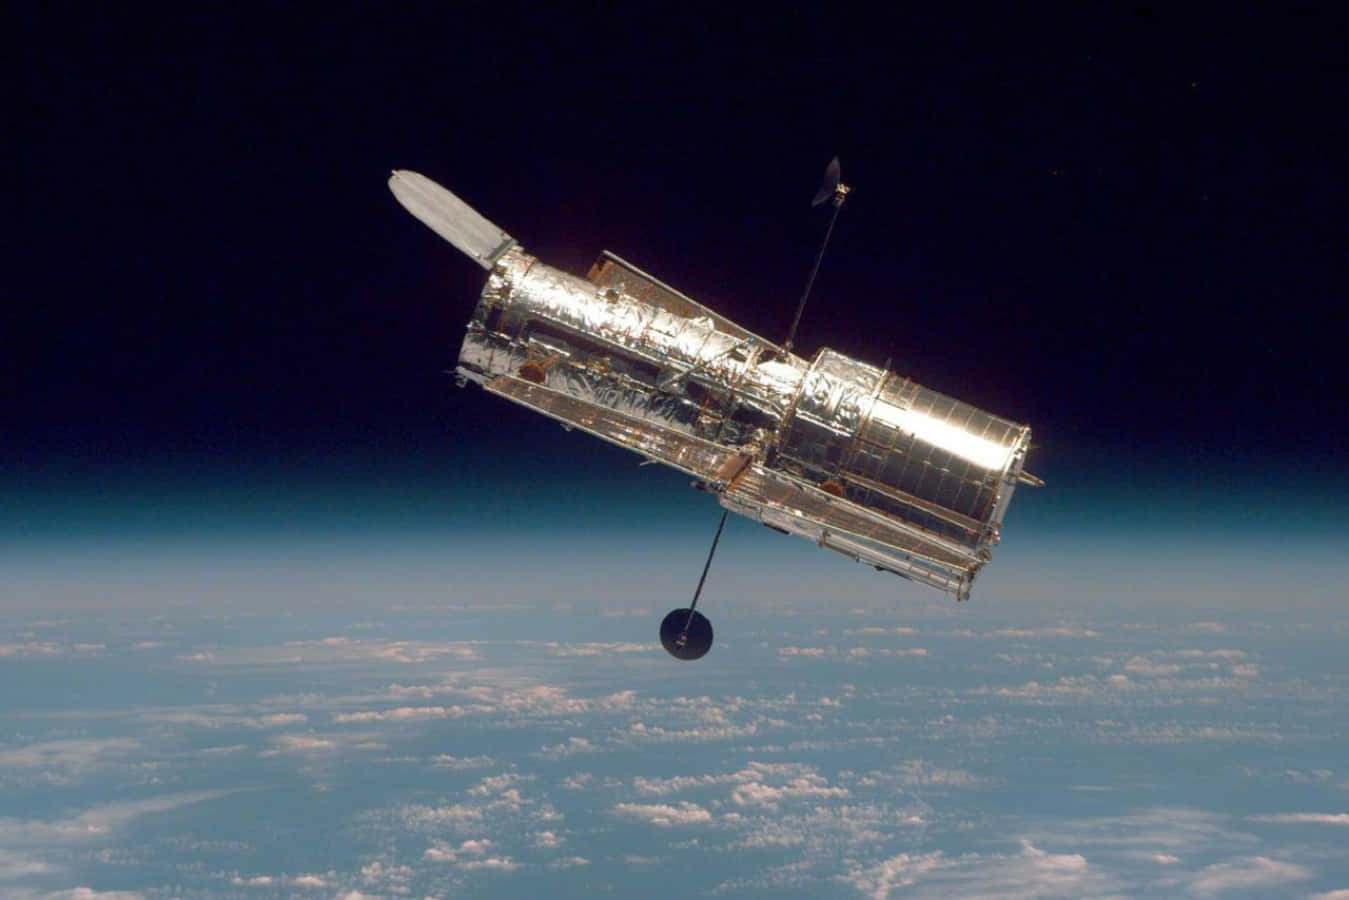 The Hubble Space Telescope Capturing the Beauty of Outer Space Wallpaper